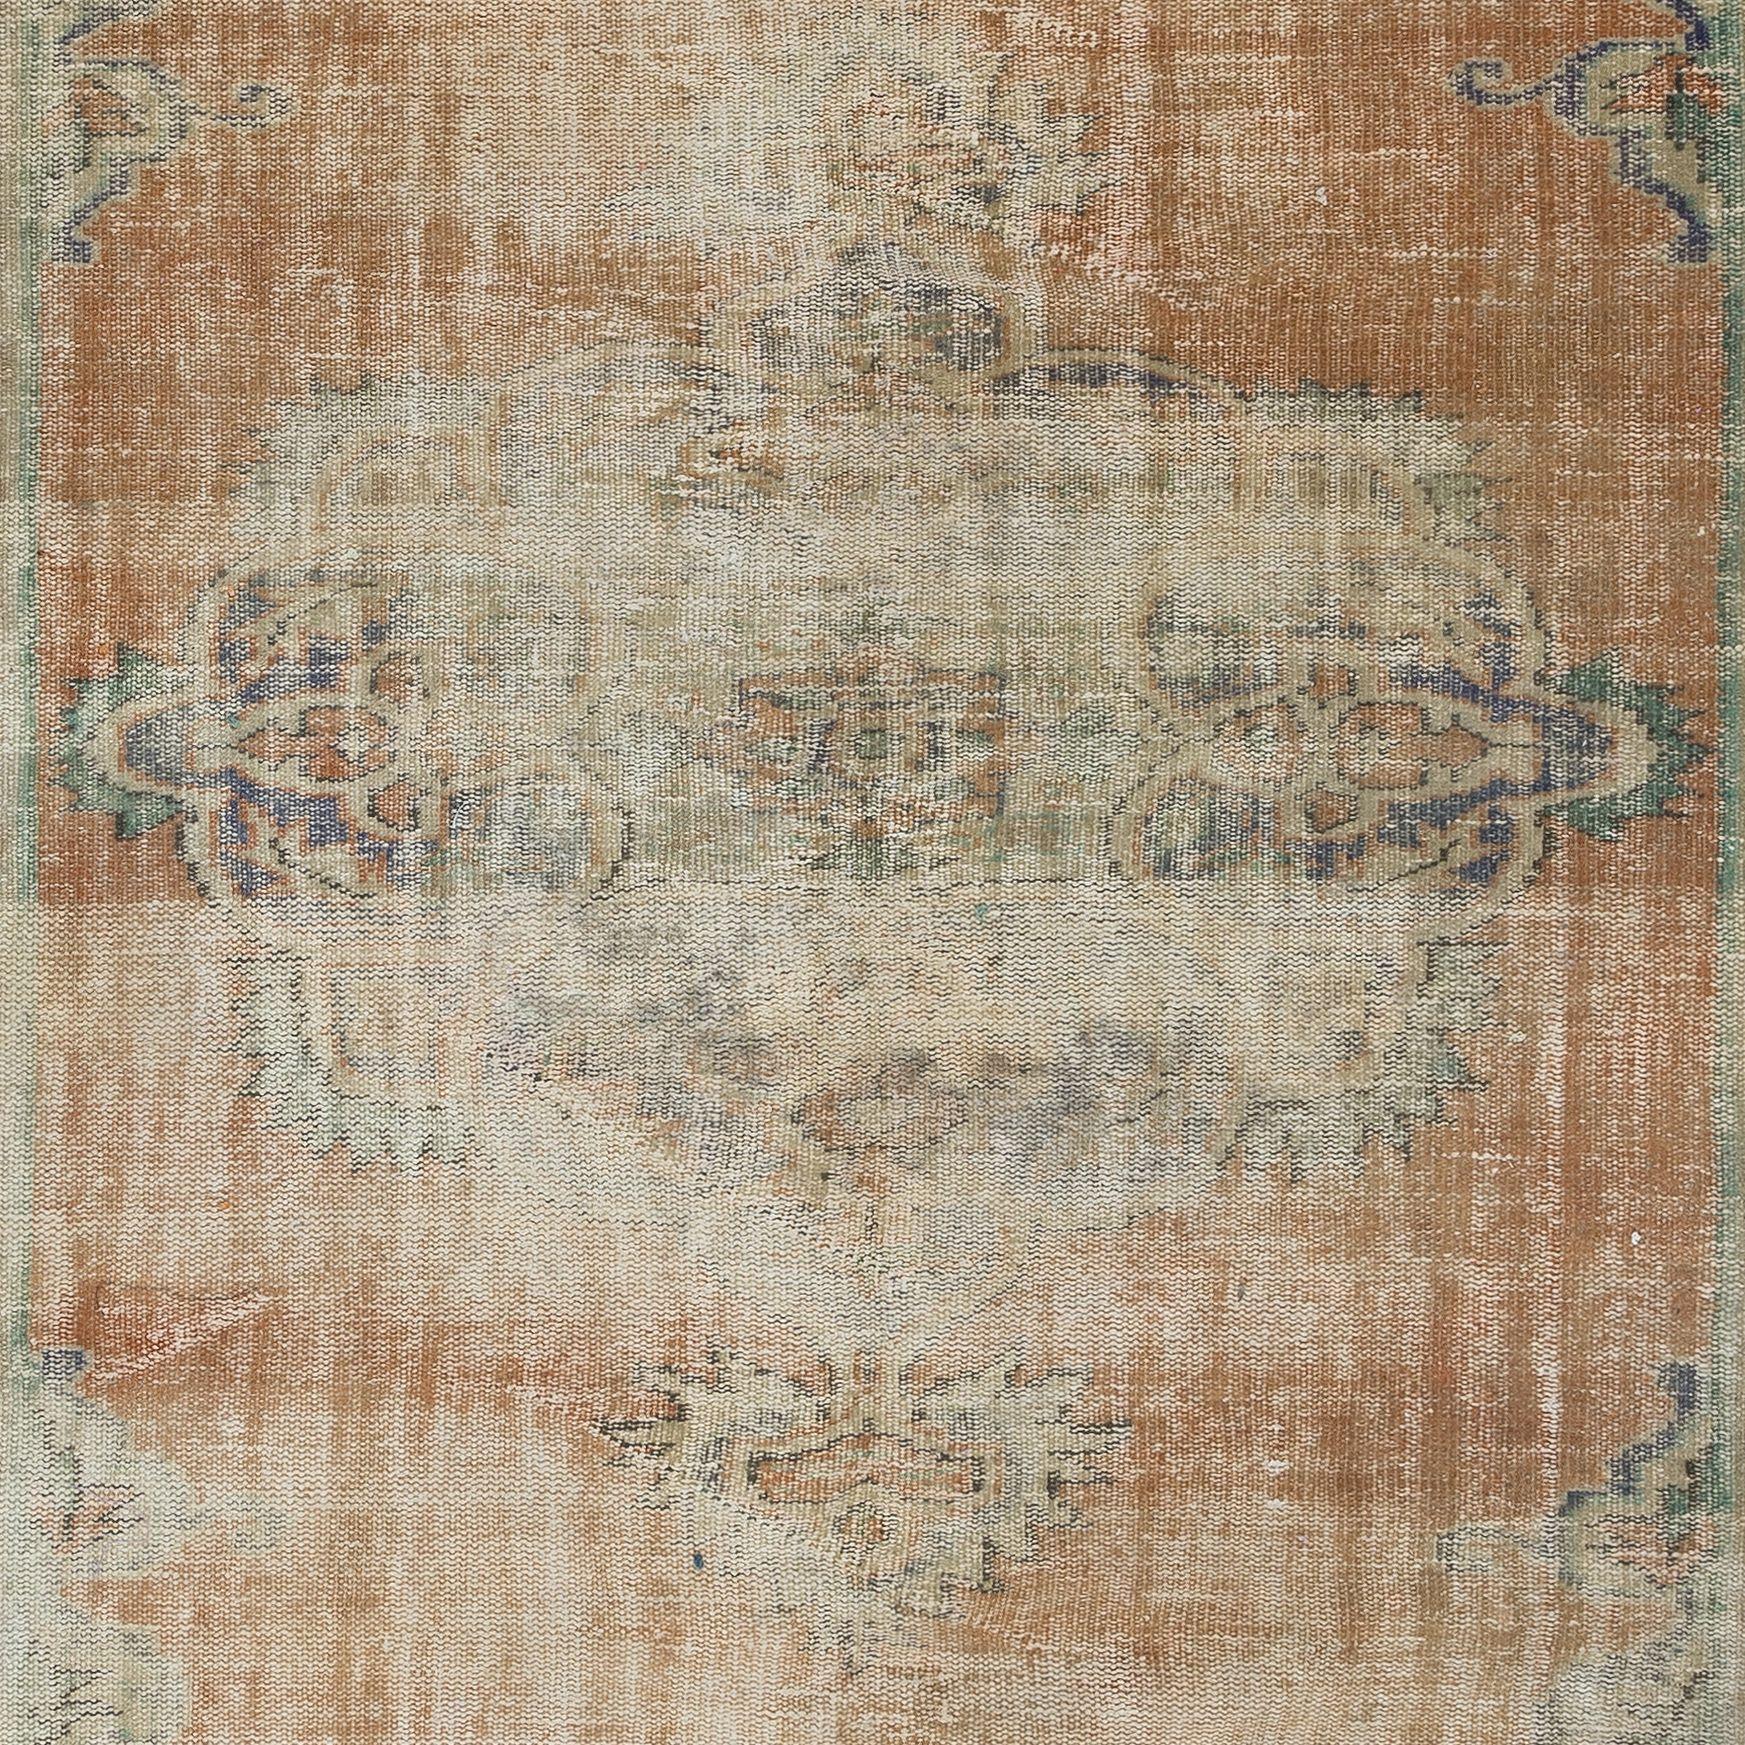 6x9.2 Ft Sun Faded Handmade Anatolian Oushak Rug, 1950s Shabby Chic Wool Carpet In Good Condition For Sale In Philadelphia, PA